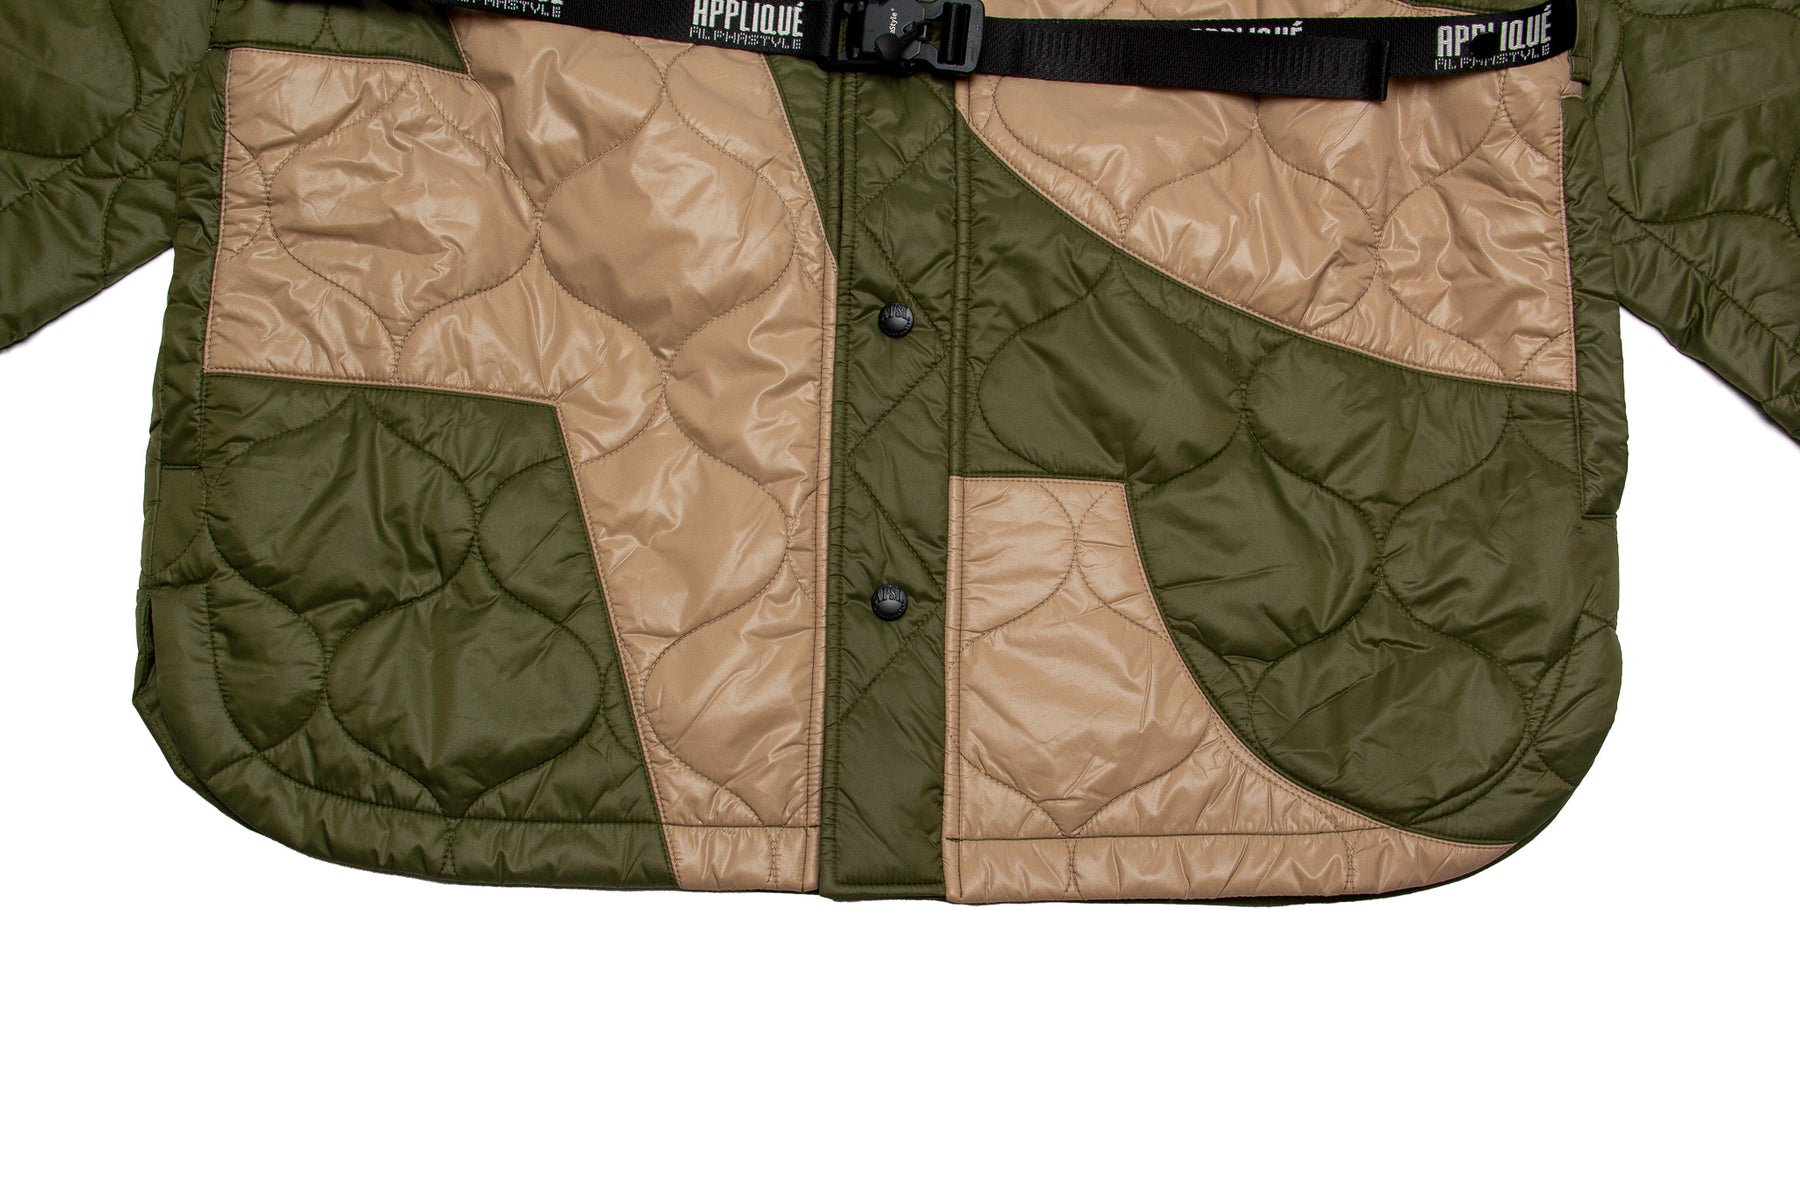 AlphaStyle Castula Quilted Jacket "Olive"